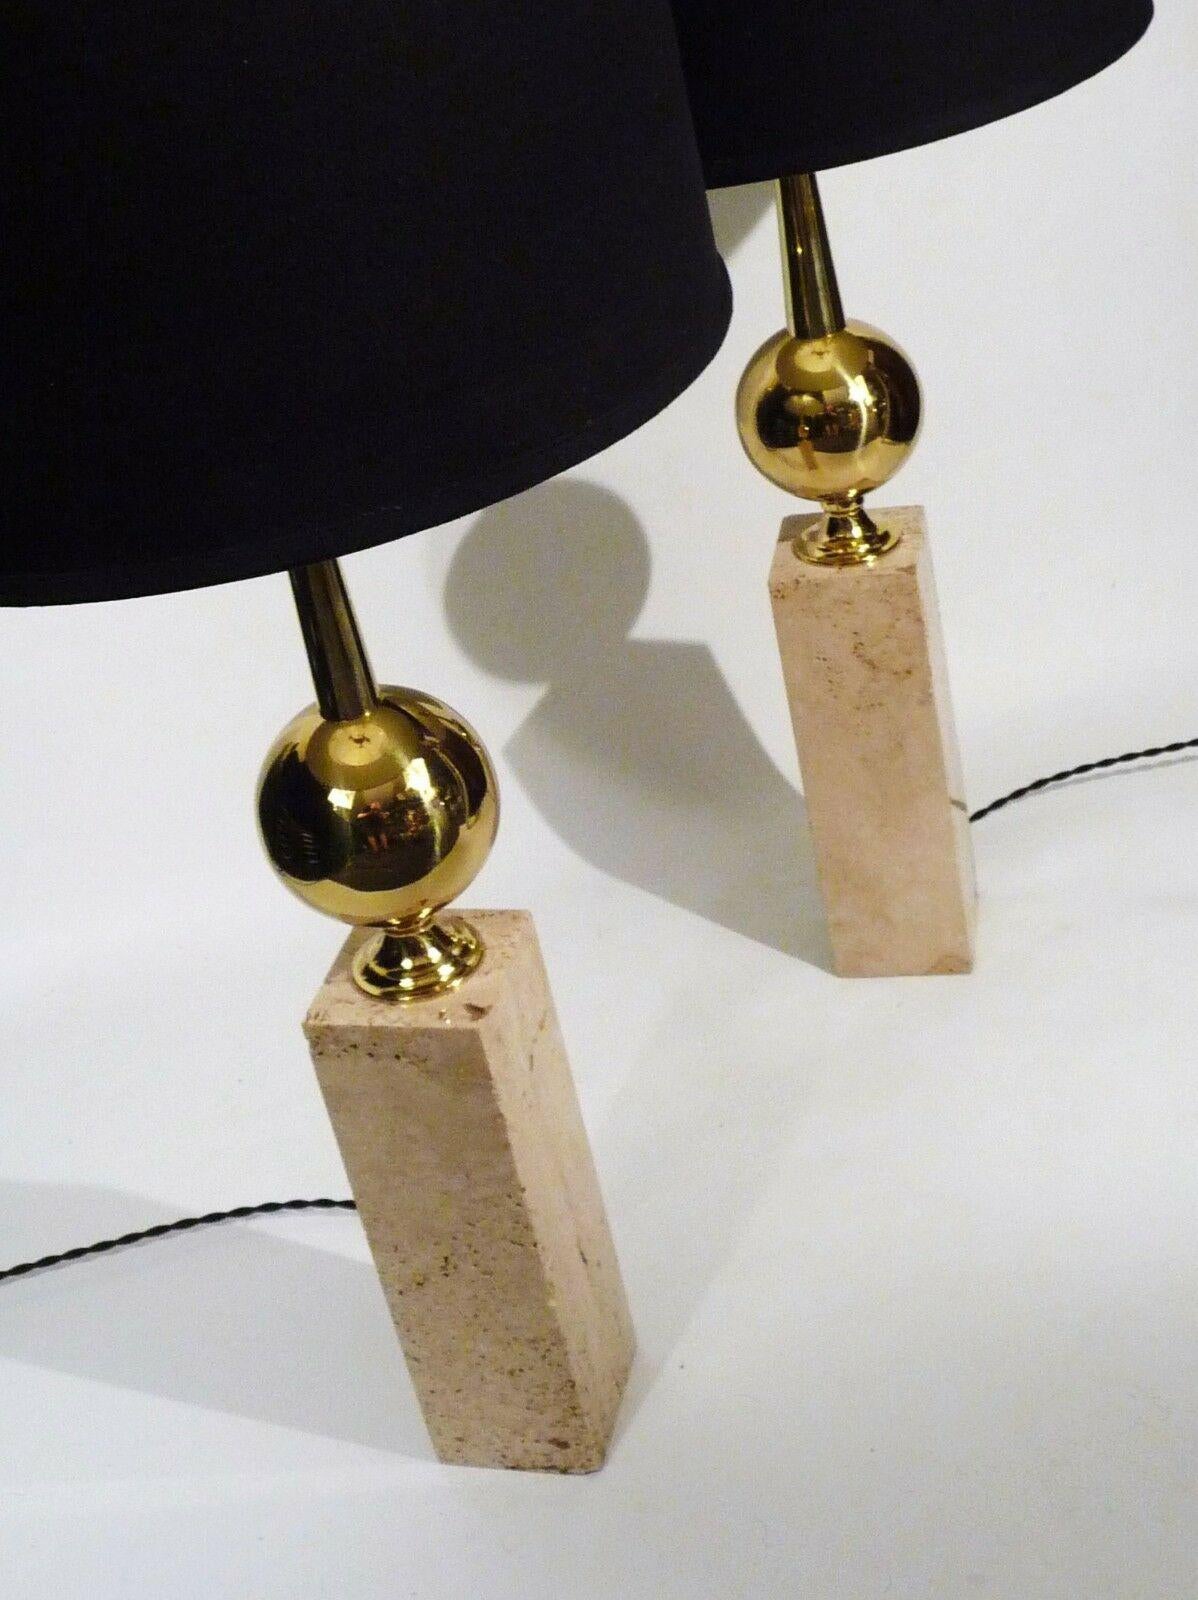 For your consideration is this pair of natural travertine and brass sphere Barbier style mid century modern classic regency table lamps. Brass elements have been re polished and both are newly rewired including premium sockets and twist wire